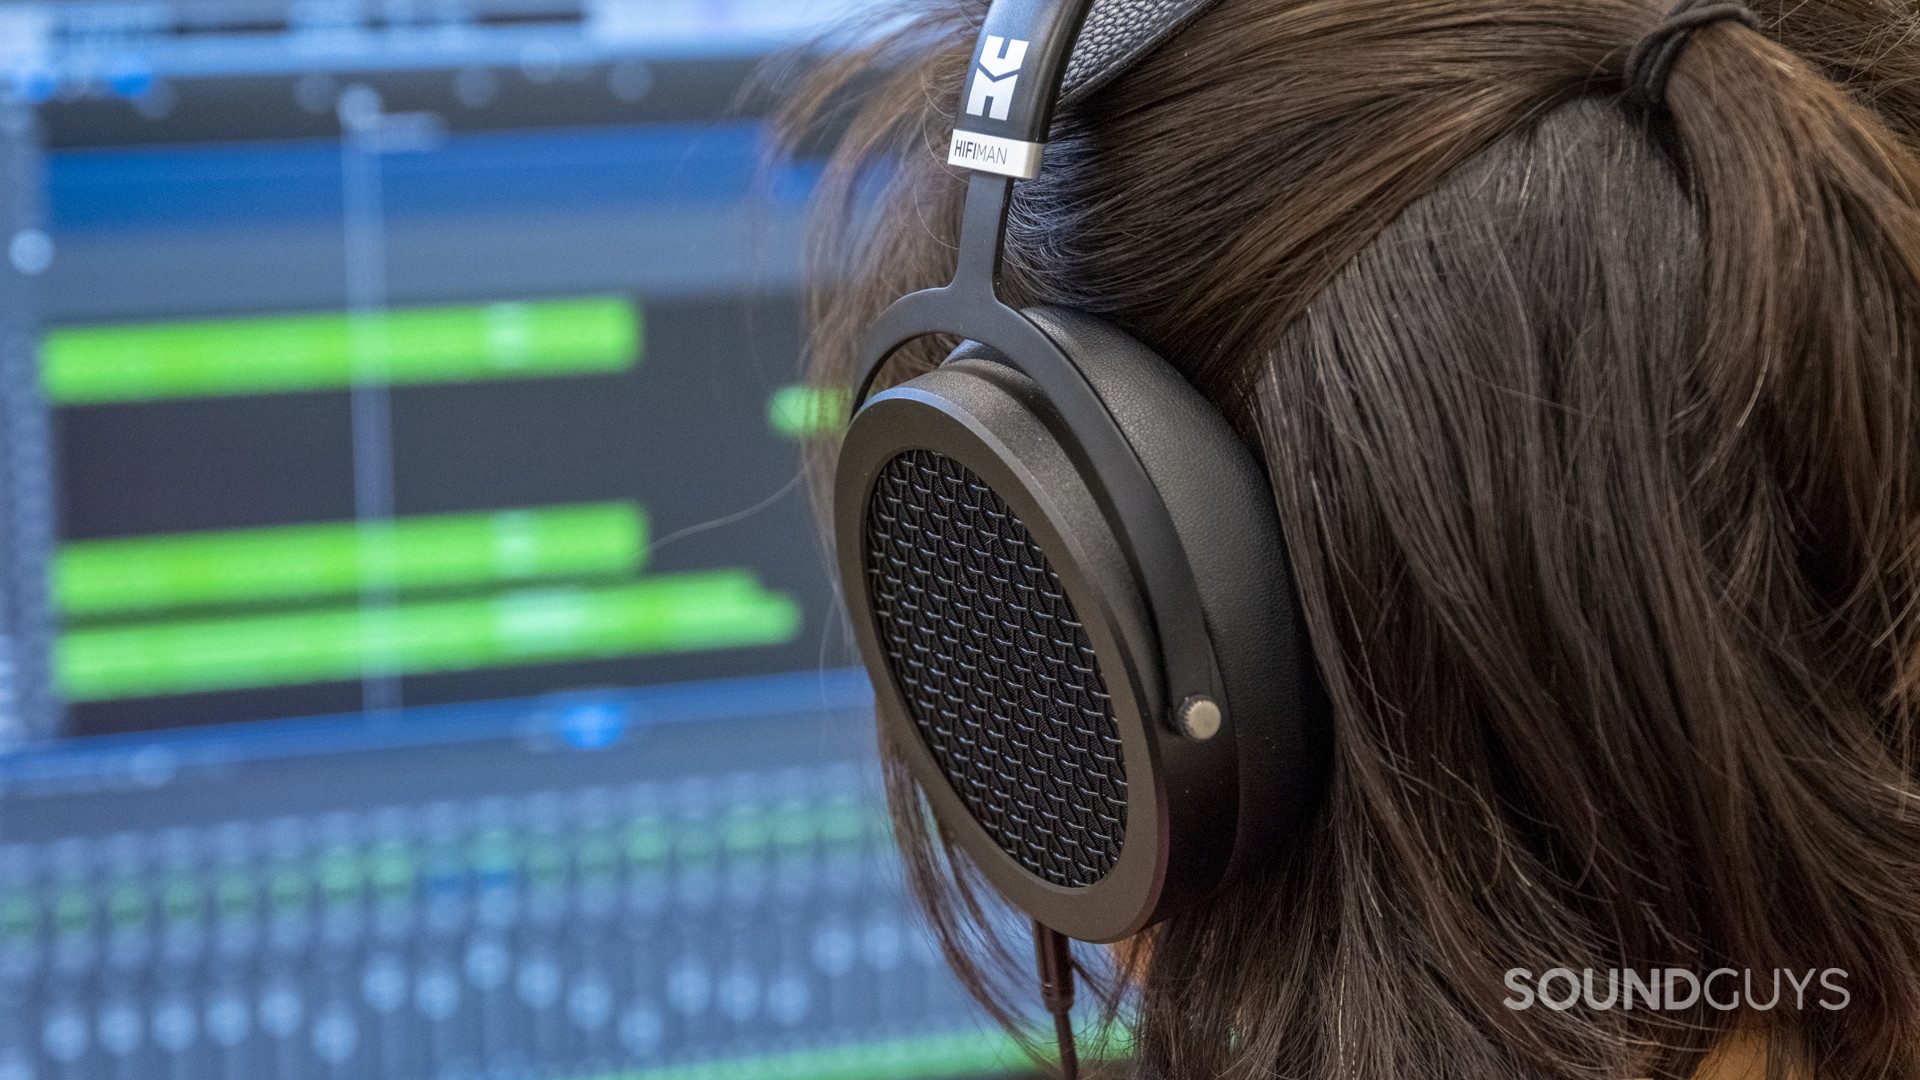 A person wears the HiFiMan Sundara open-back wired headphones with the left ear cup showing.